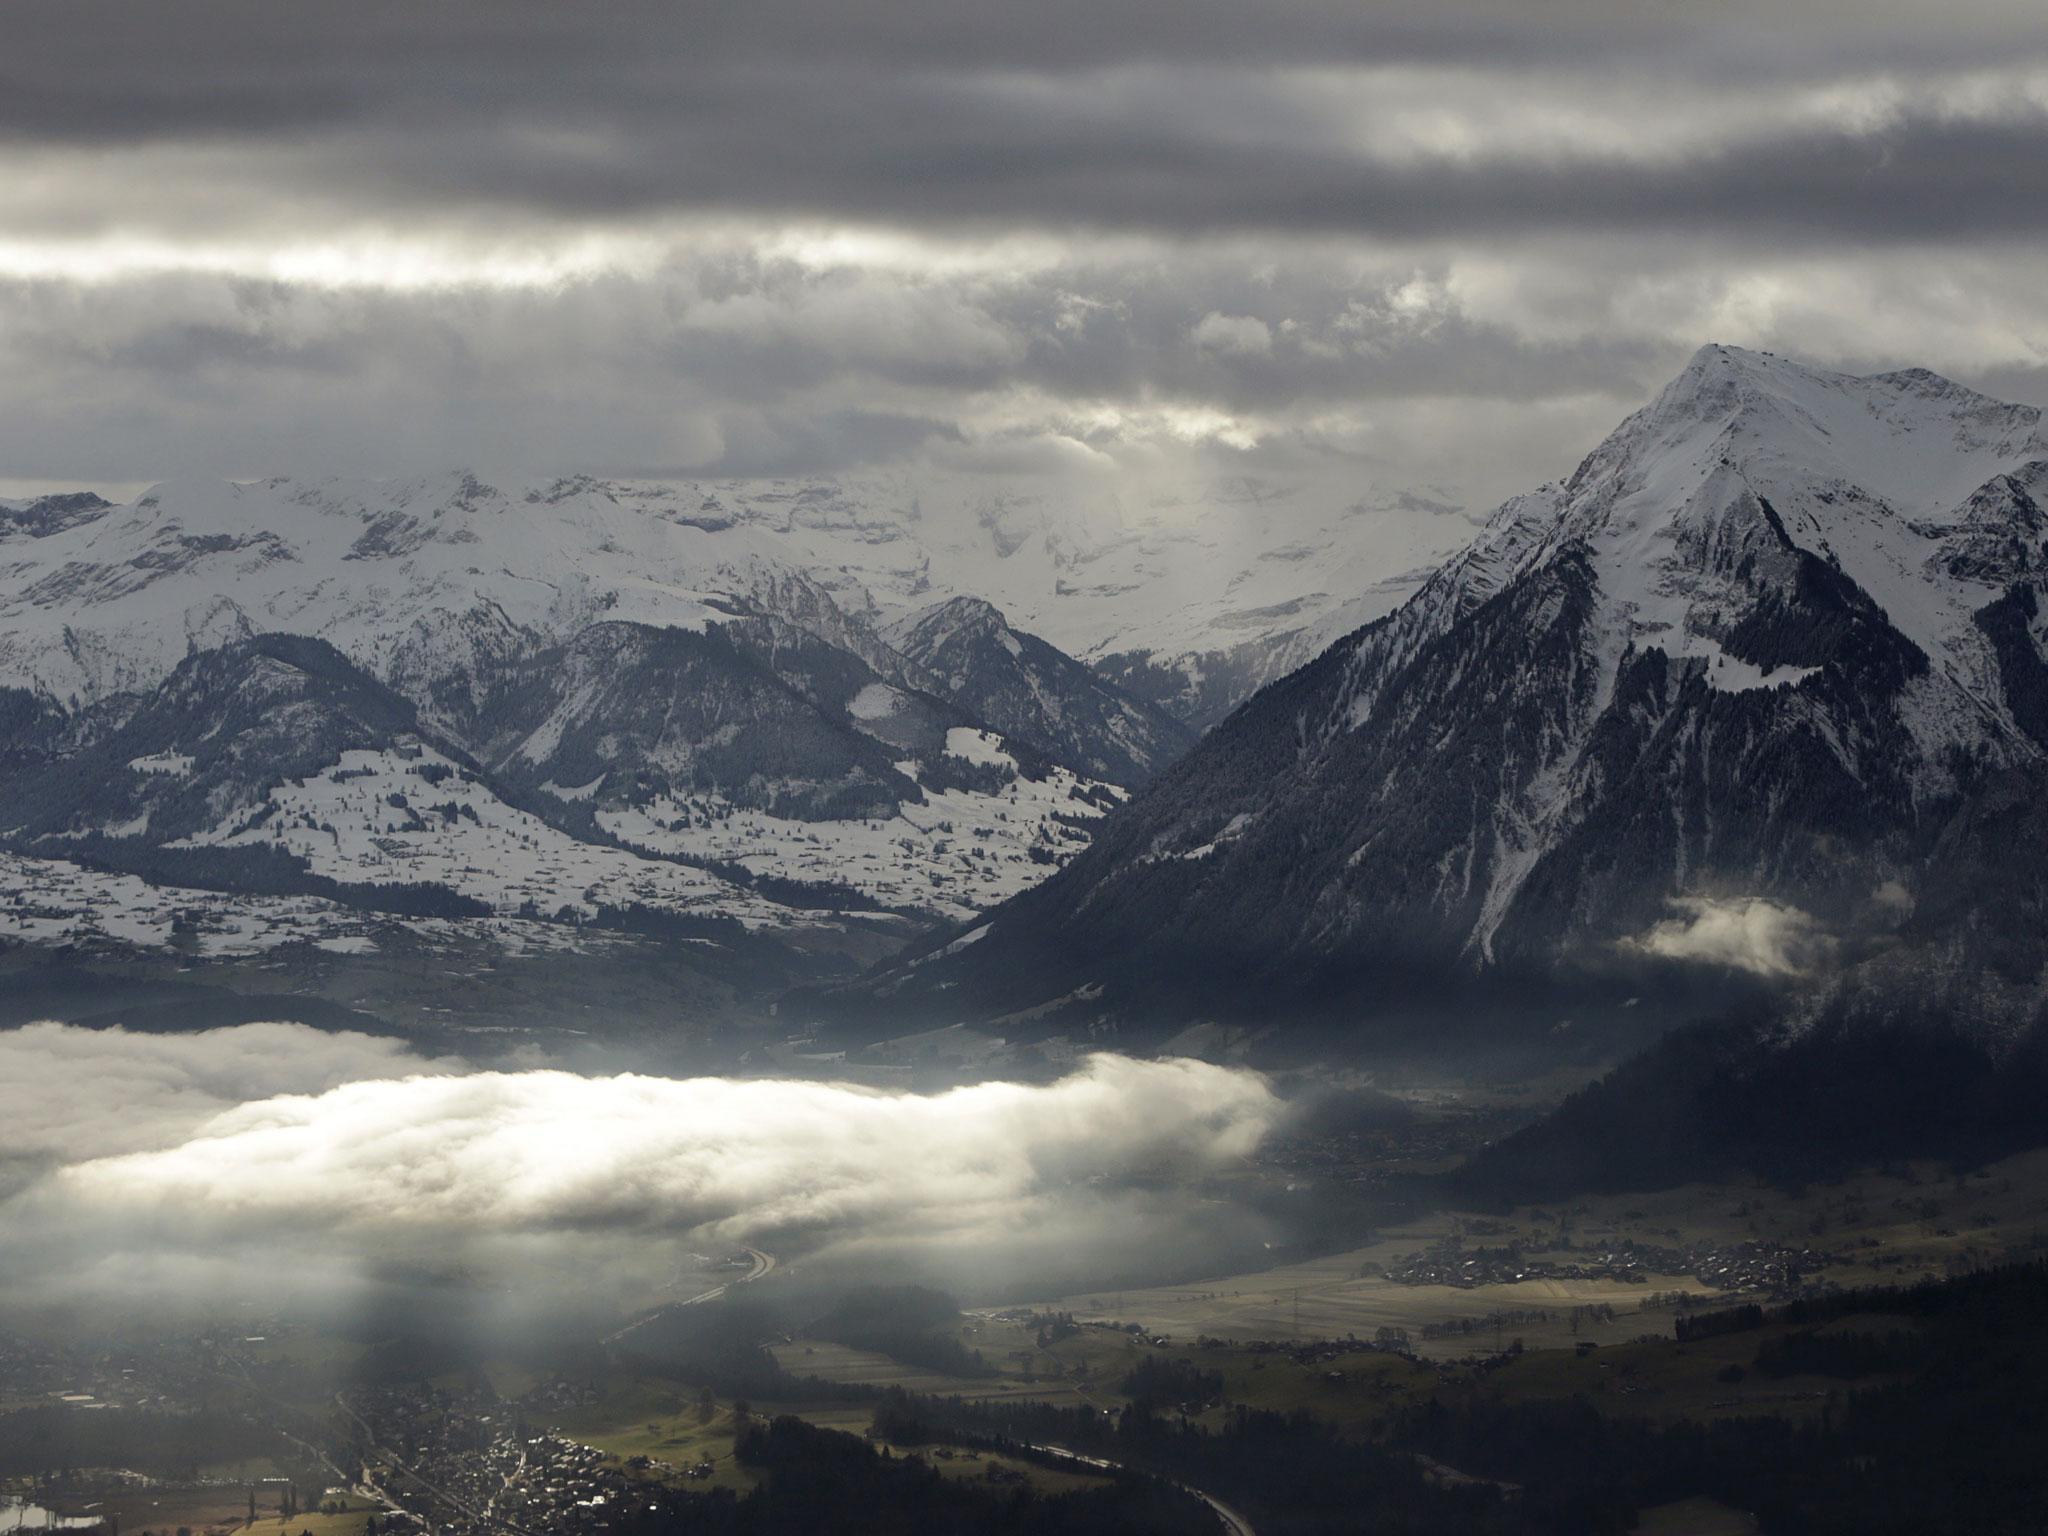 The Alps as seen from a helicopter